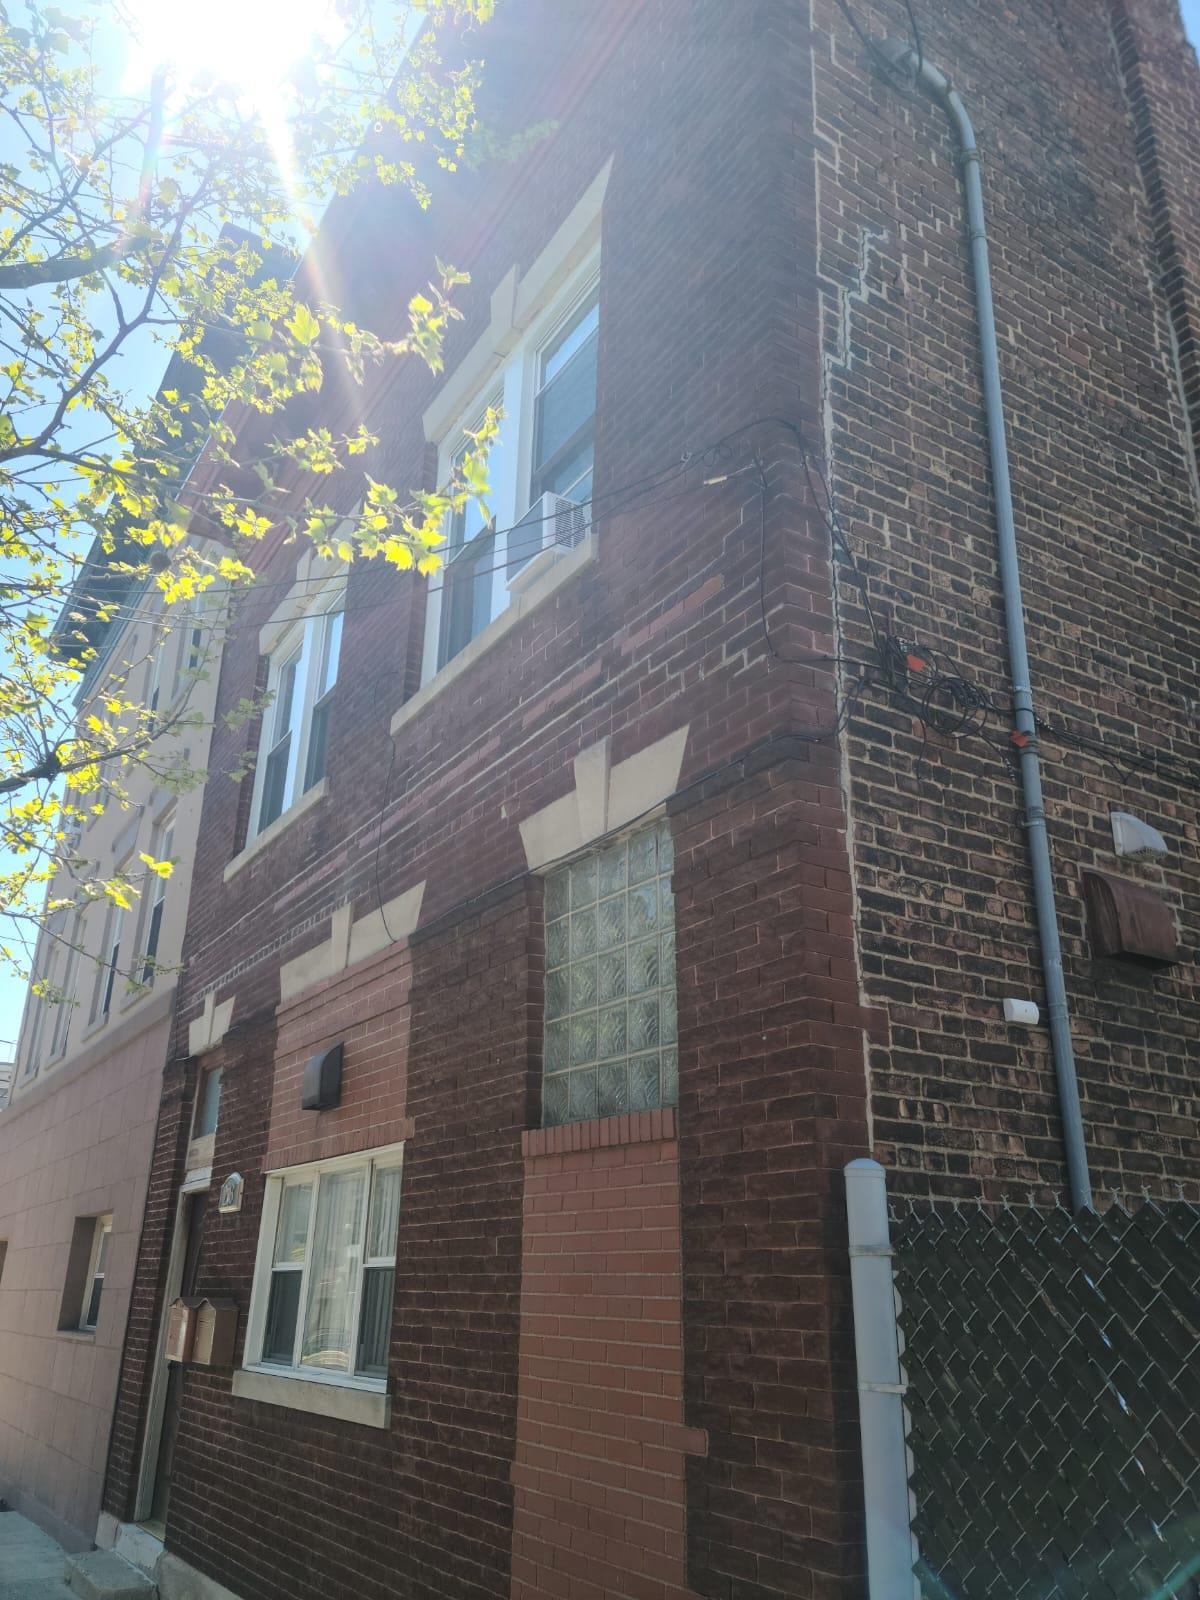 # 240007660 - For Rent in West New York NJ